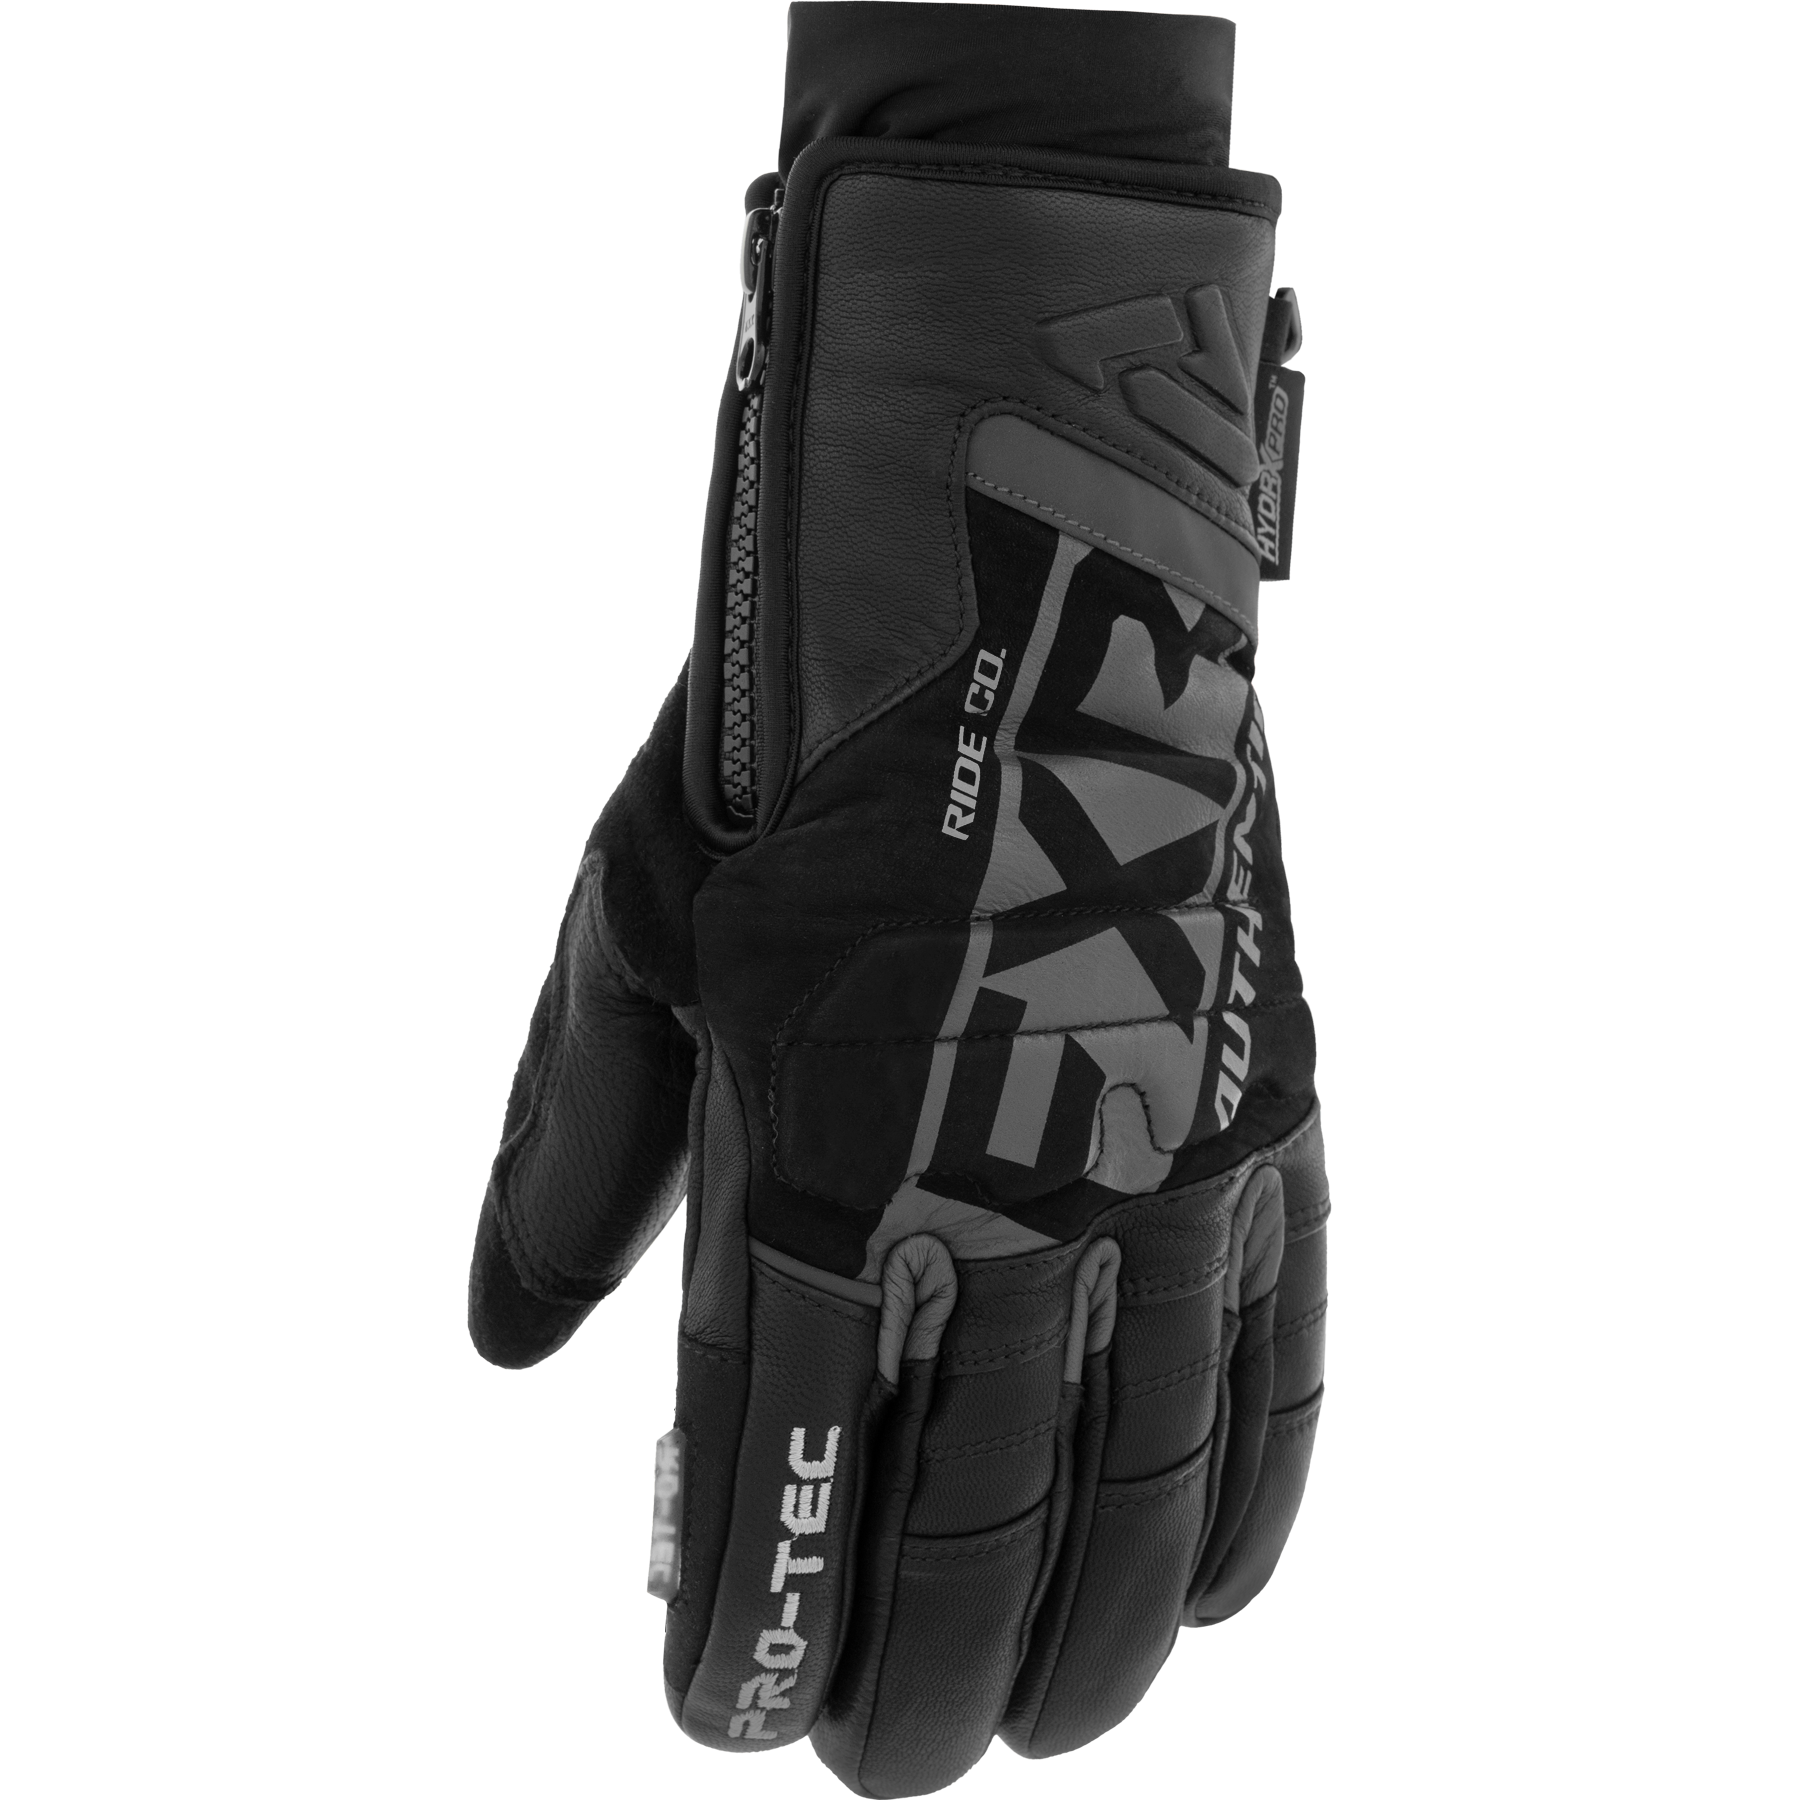 fxr racing gloves  protec leather gloves - snowmobile